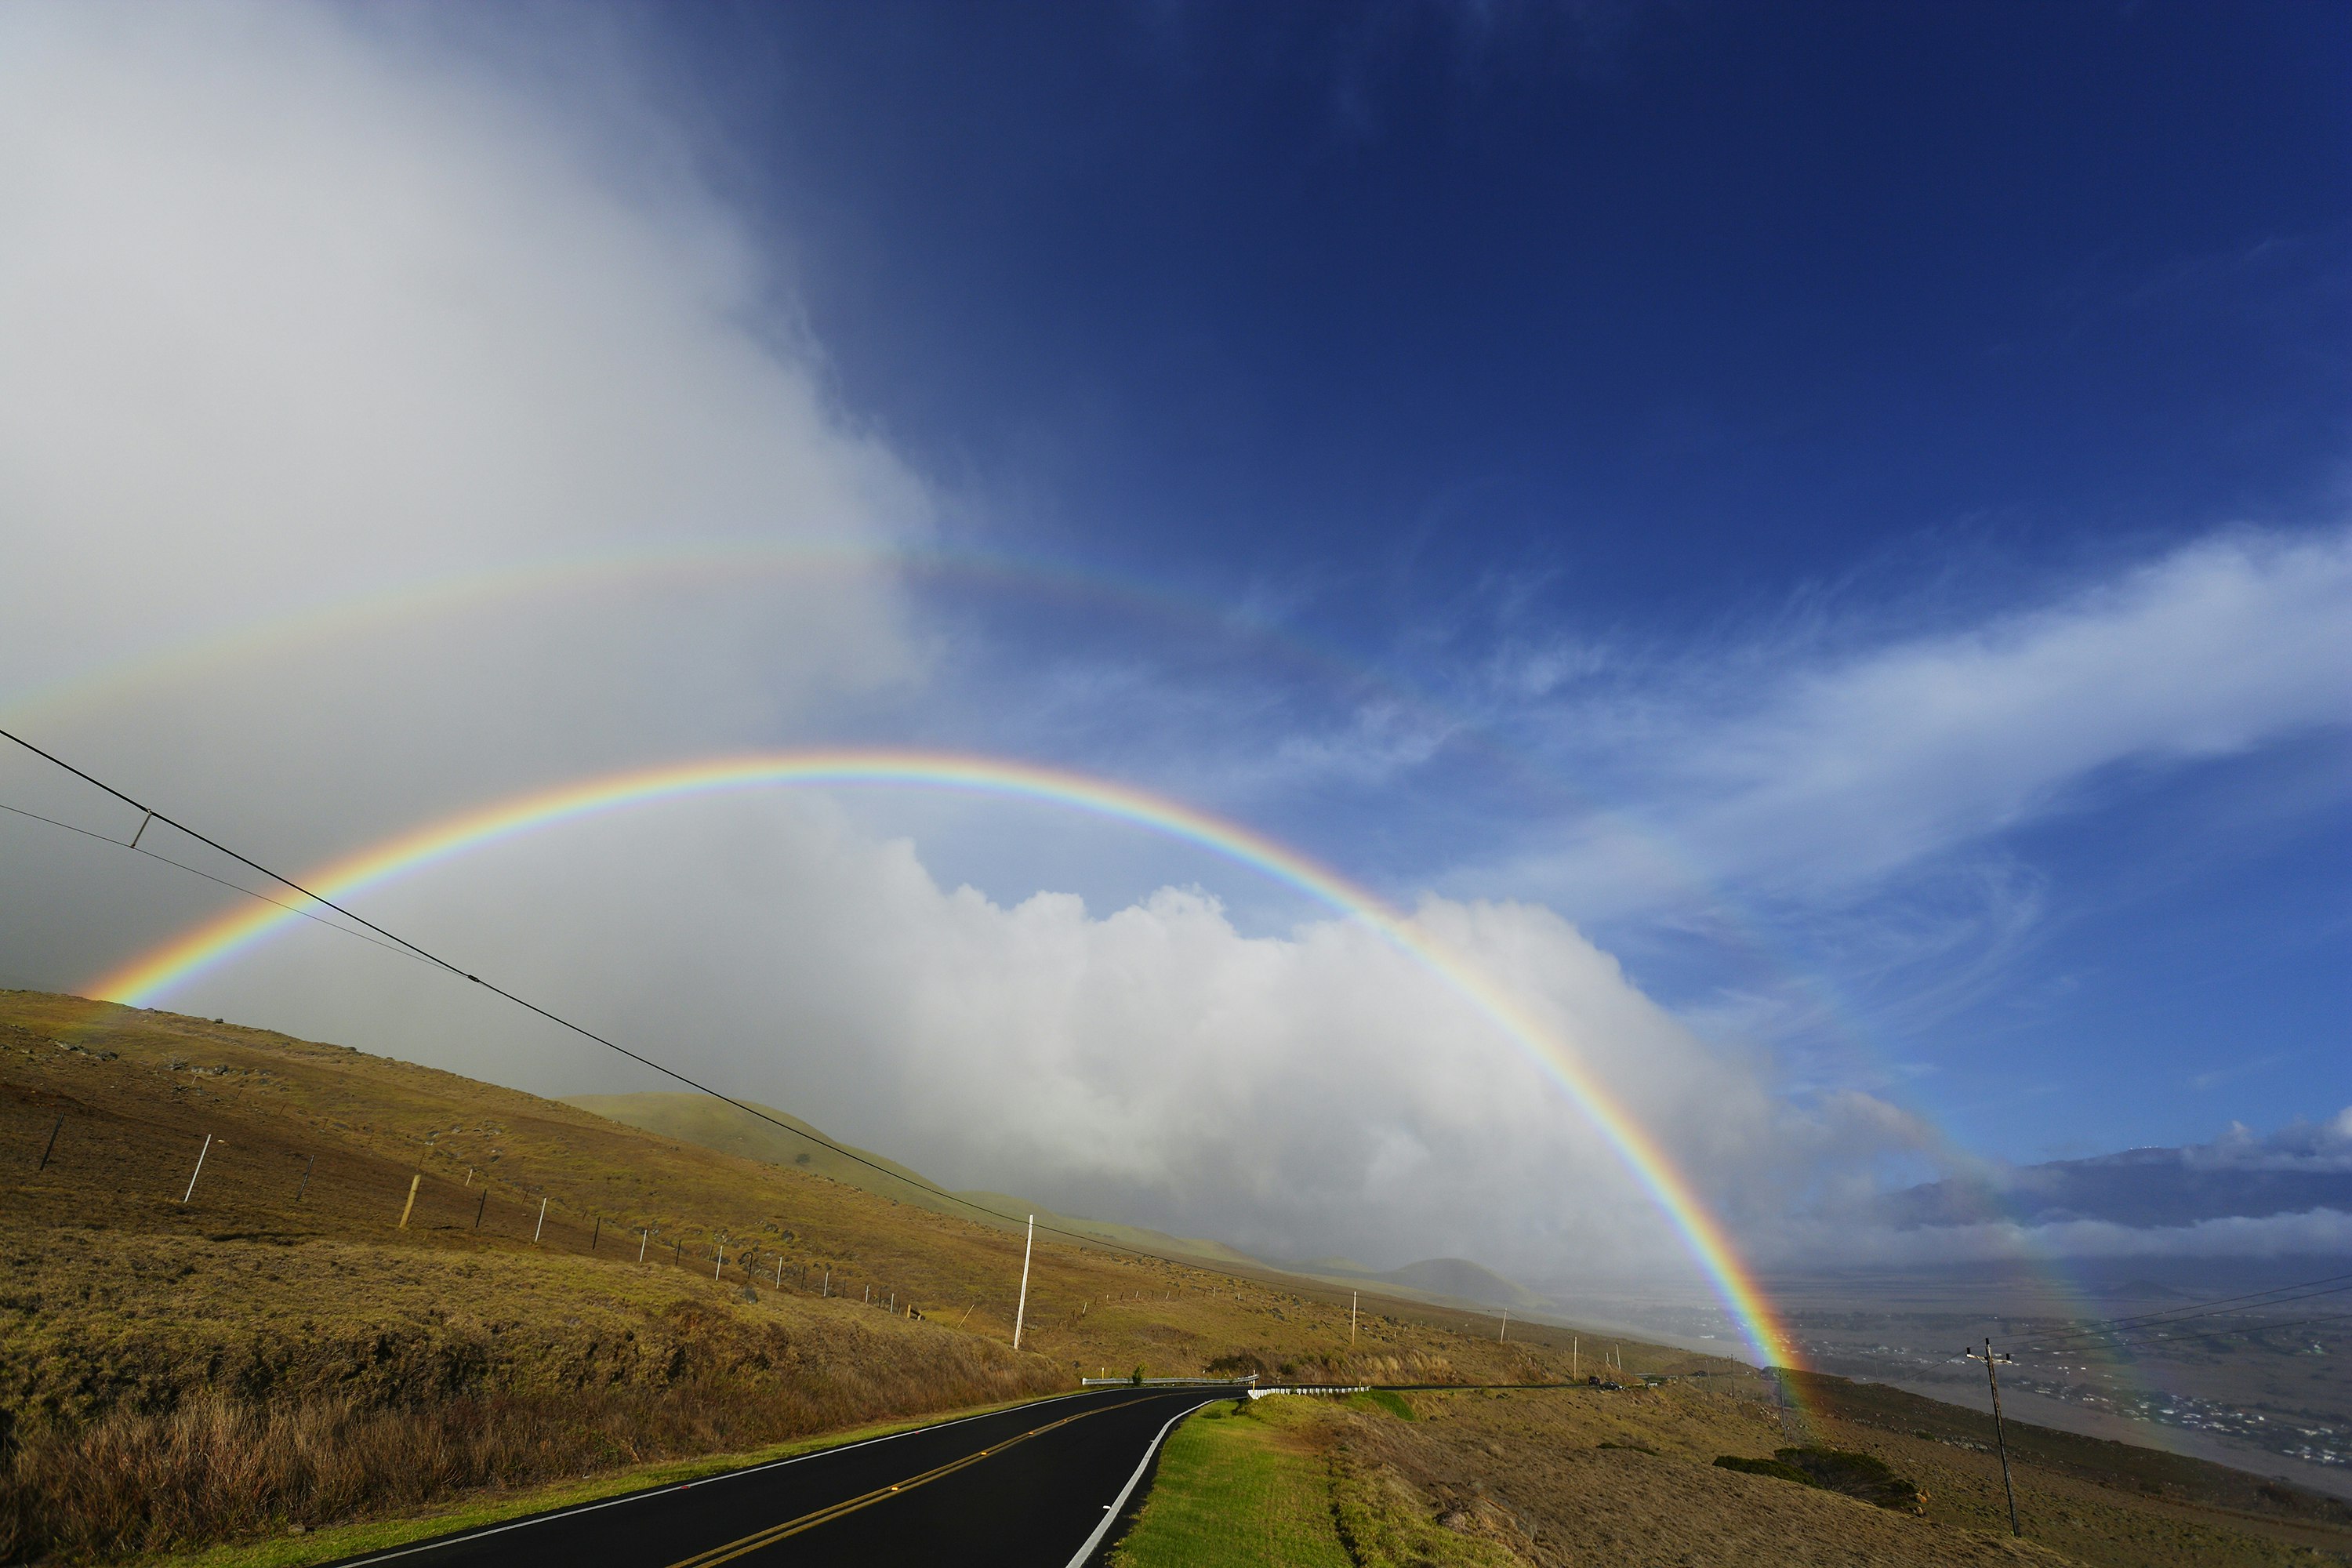 Features - Rainbow appearing over the highway.